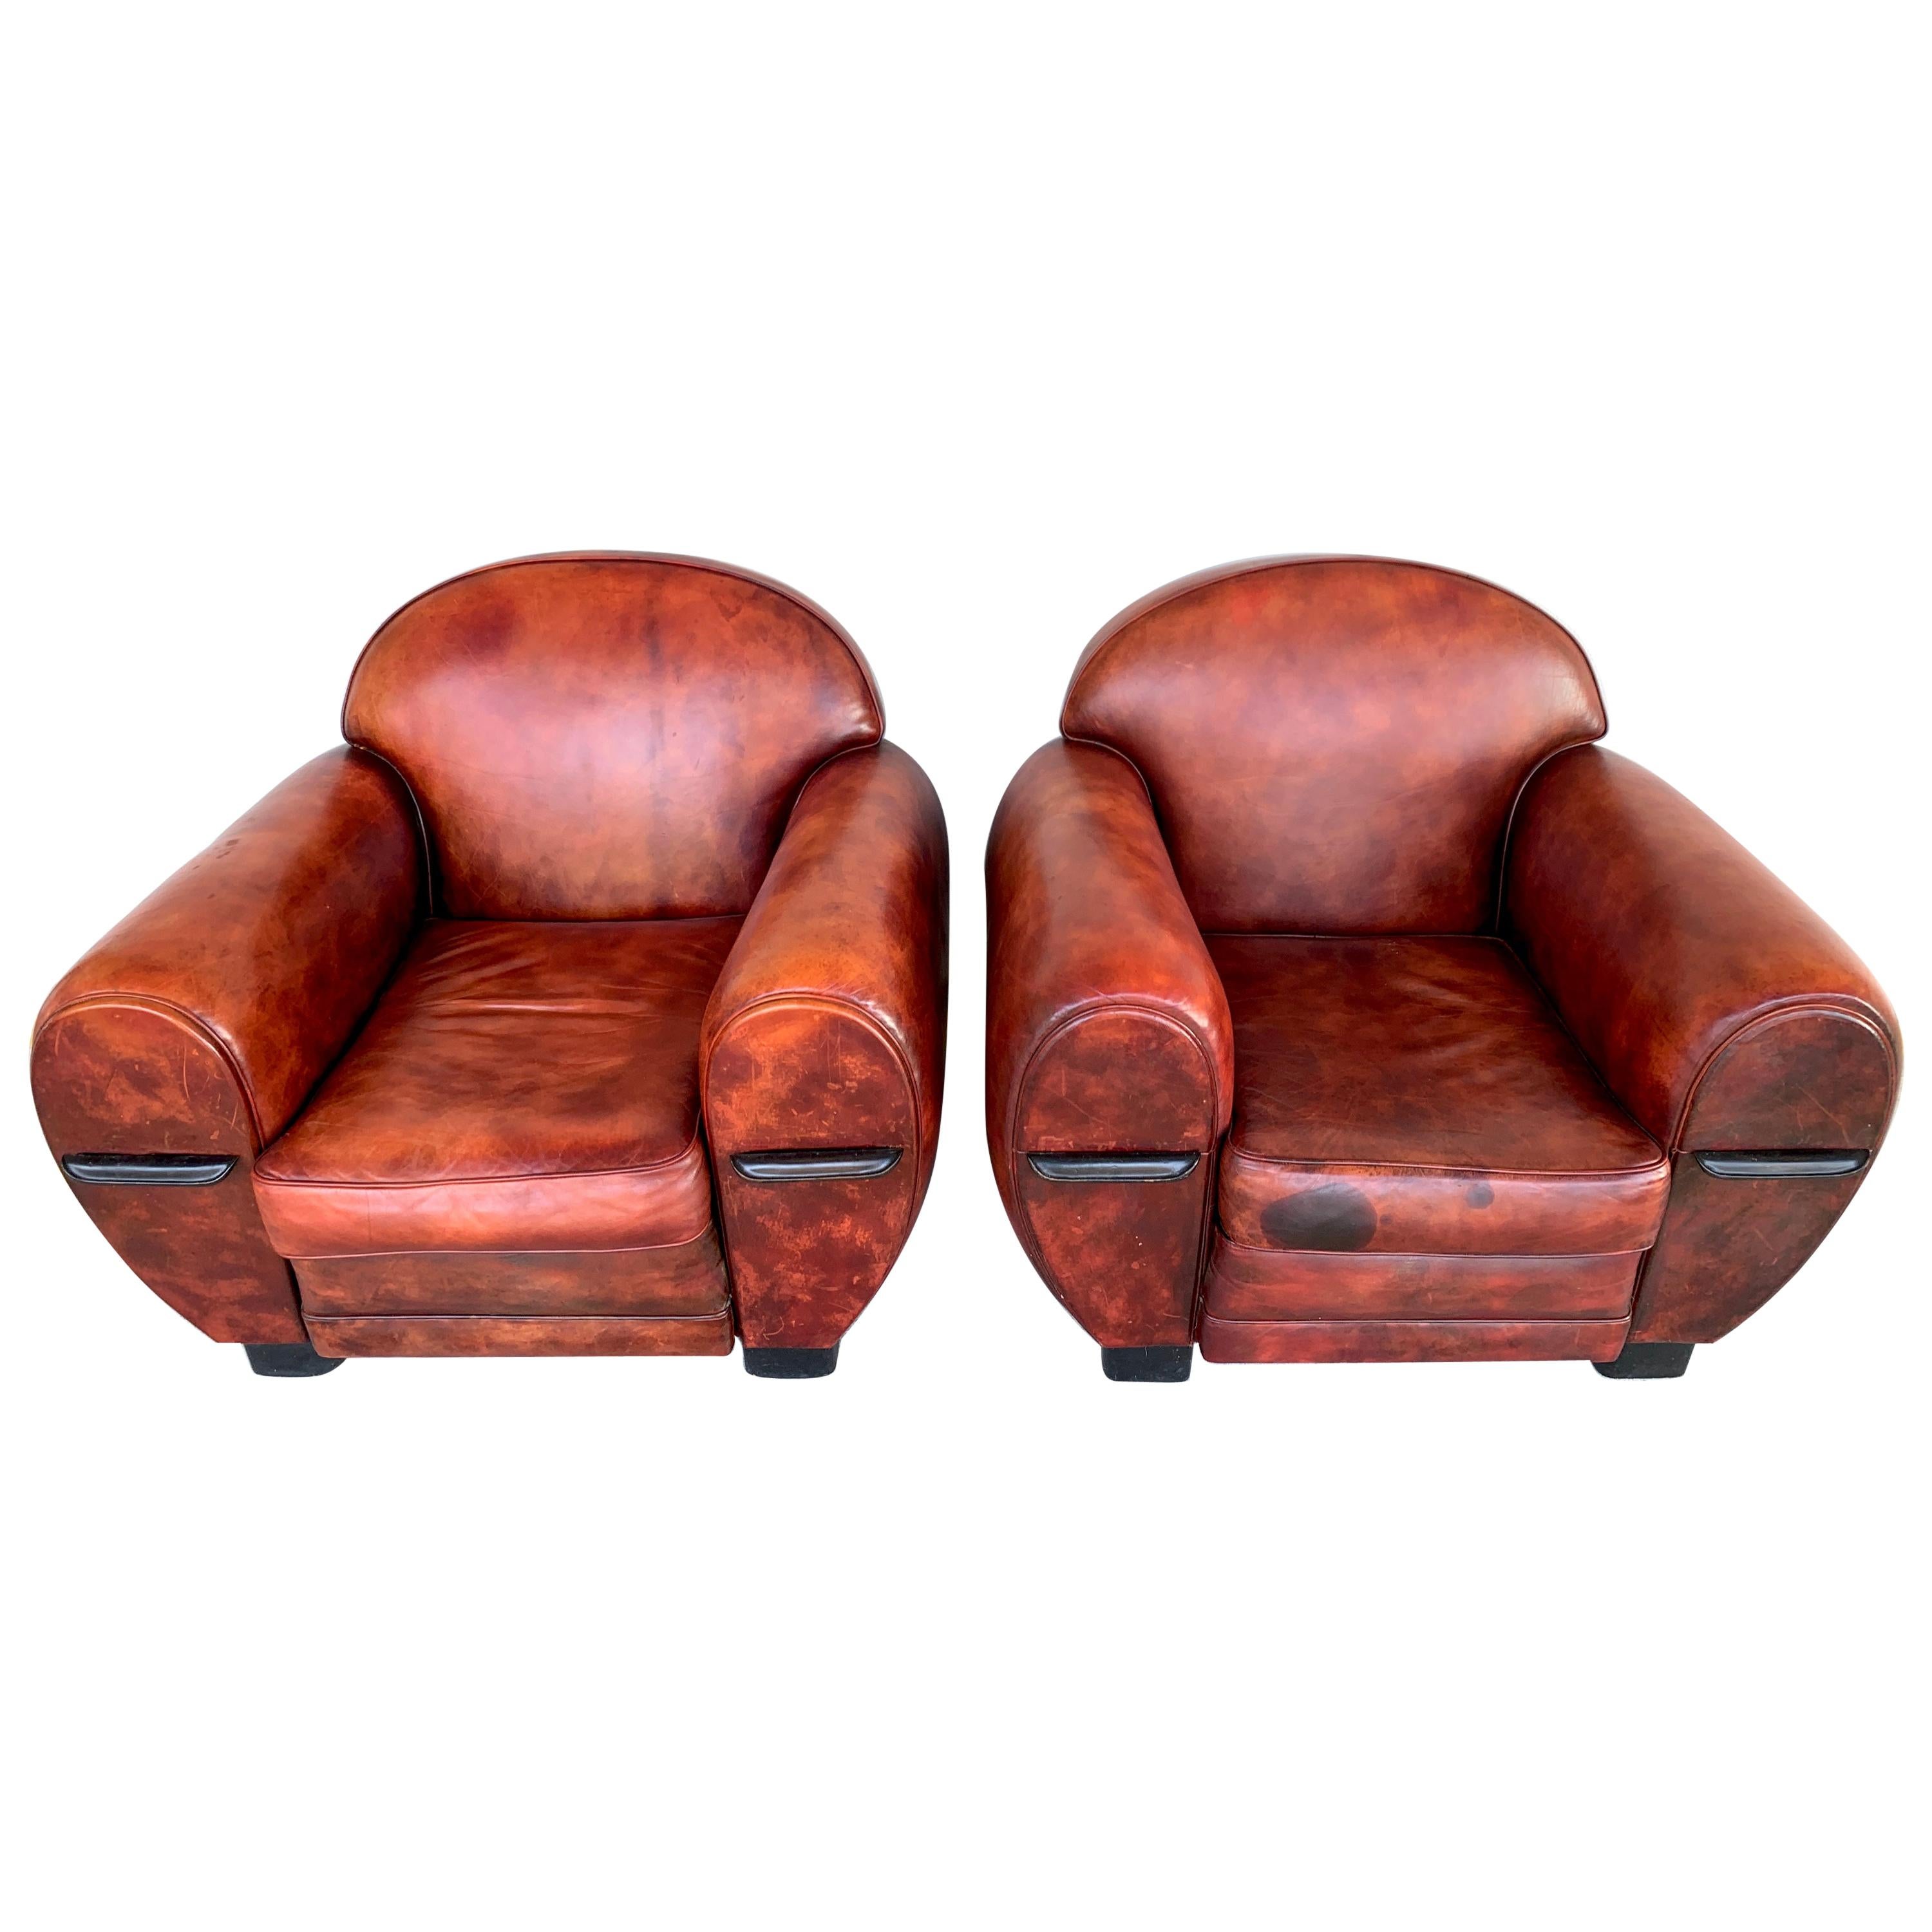 Pair of French Art Deco Leather Club Chairs For Sale